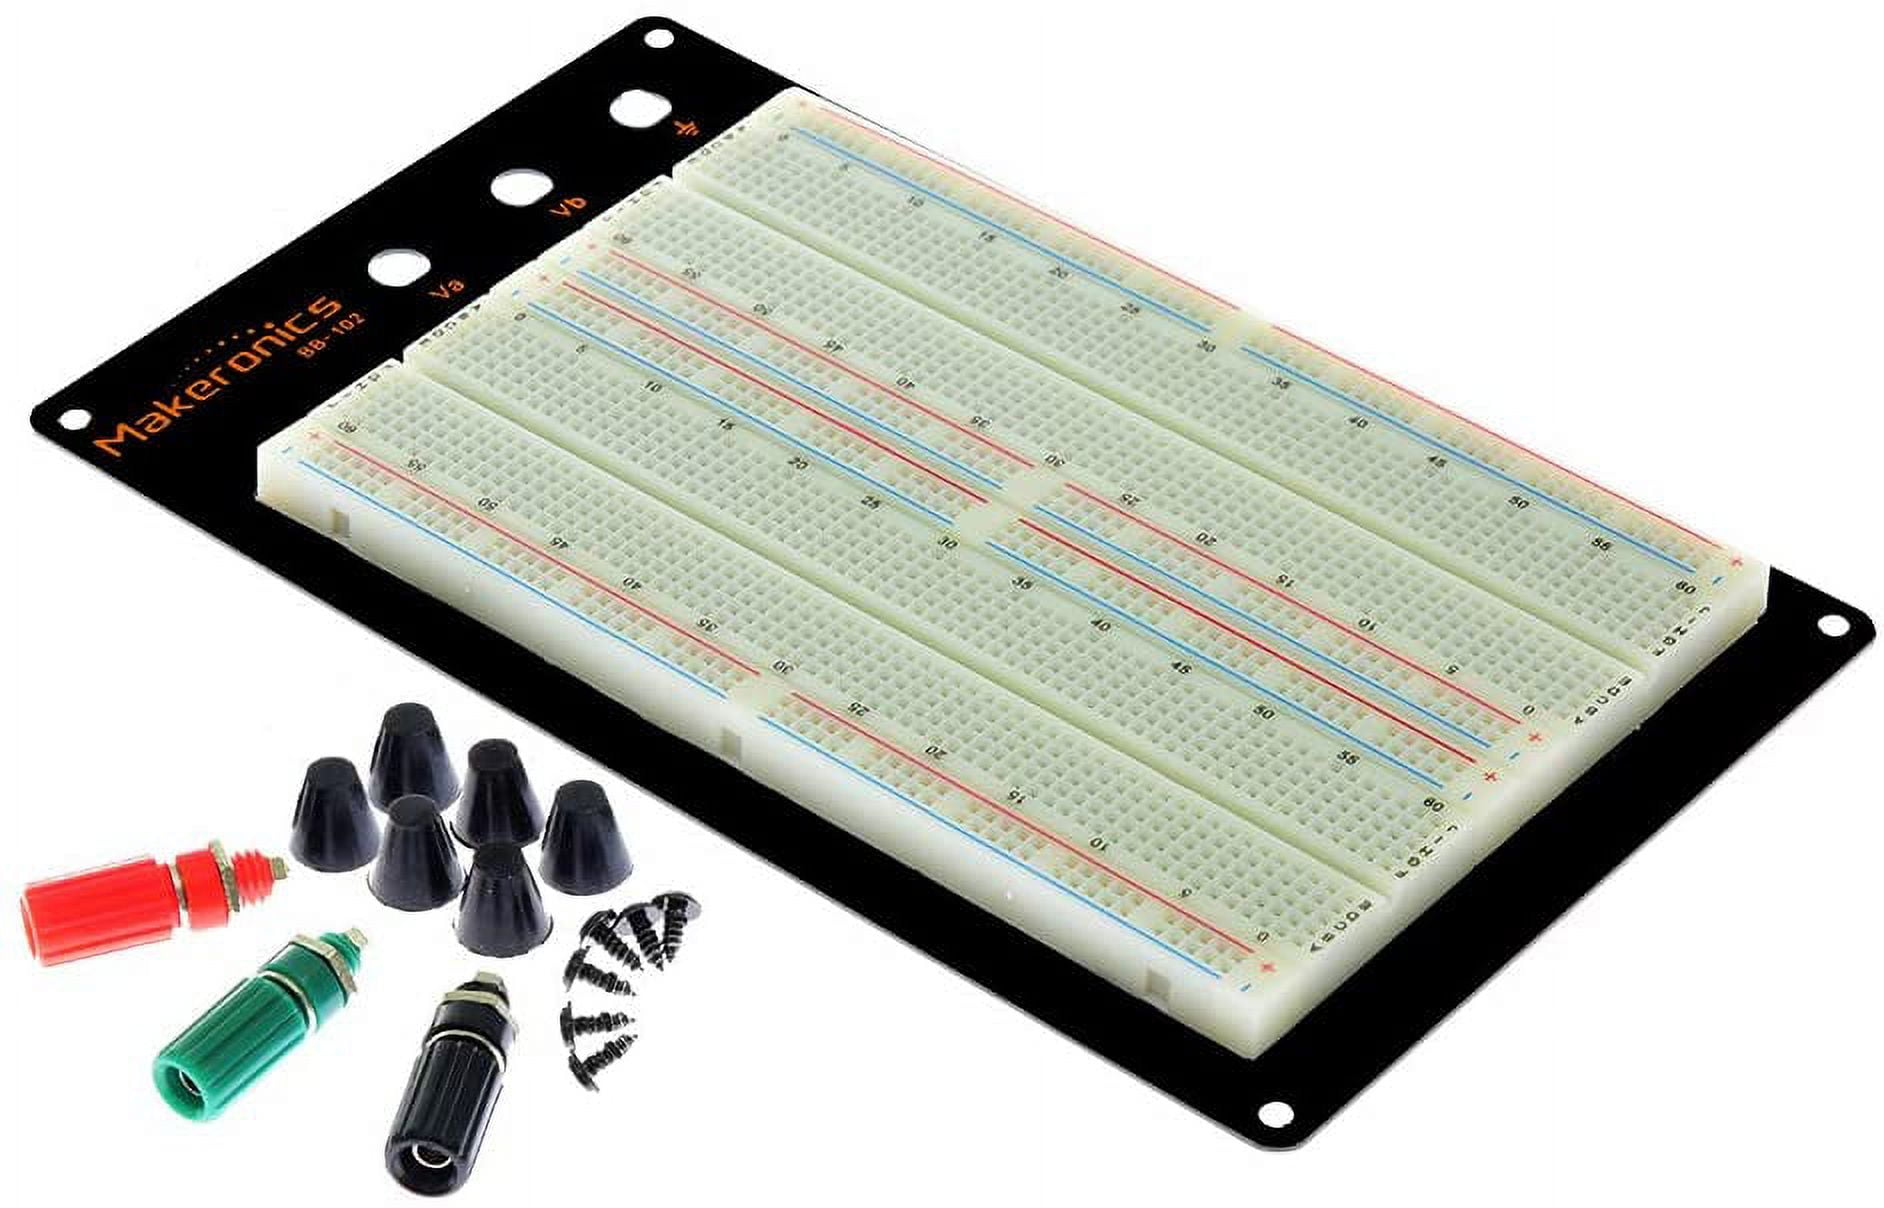 Makeronics Solderless 1660 Breadboard Super Kit - 1660 Tie-Points  Experiment Plug-in Breadboard with Aluminum Back Plate + 350 Jumper Wires +  65 Jumper Wires for Prototyping Circuit/Arduino 